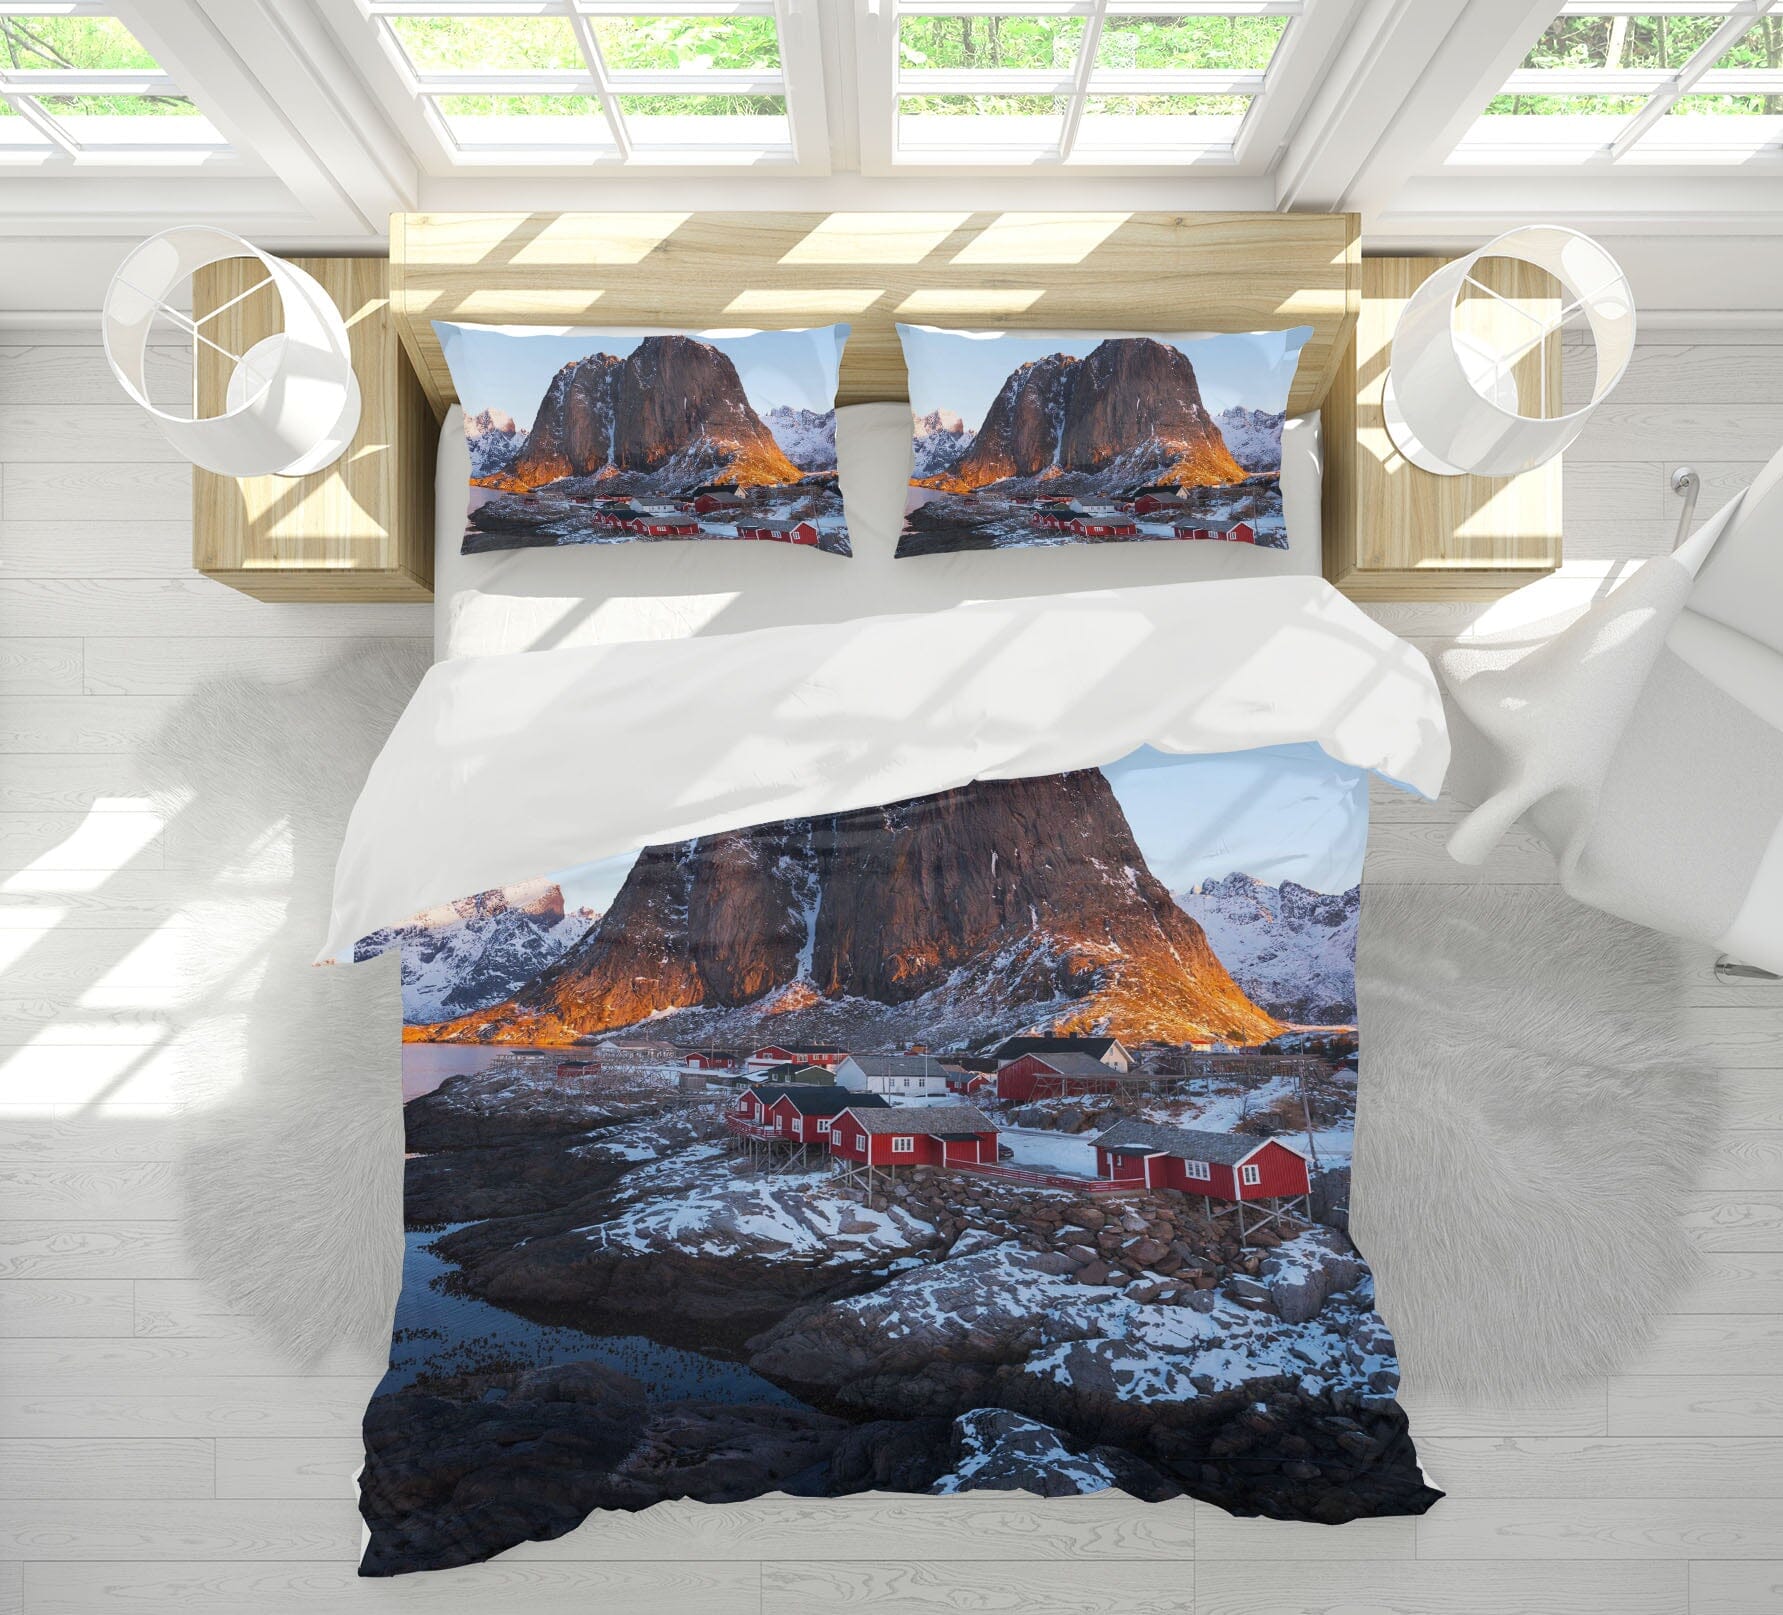 3D Snow Mountain 2145 Marco Carmassi Bedding Bed Pillowcases Quilt Quiet Covers AJ Creativity Home 